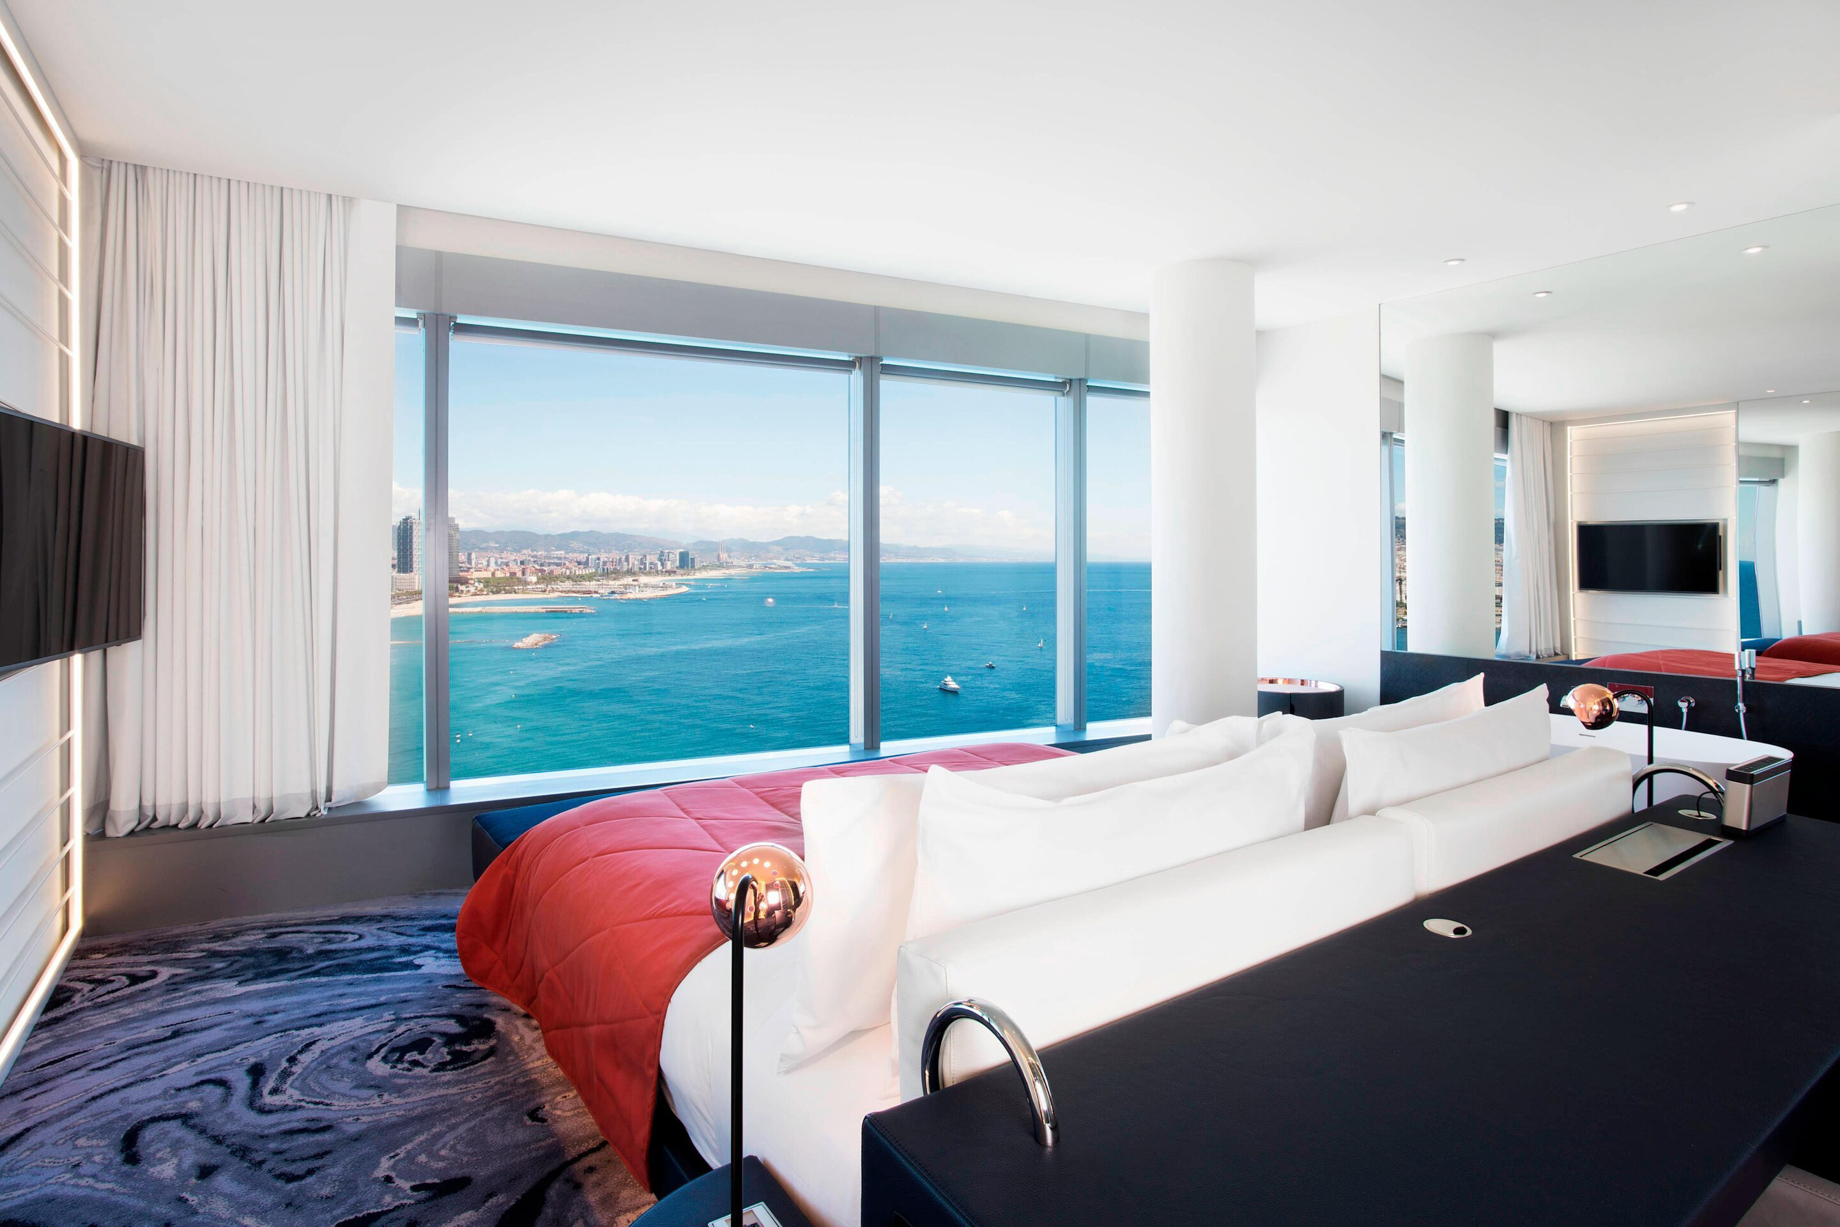 W Barcelona Hotel - Barcelona, Spain - Spectacular Suite View